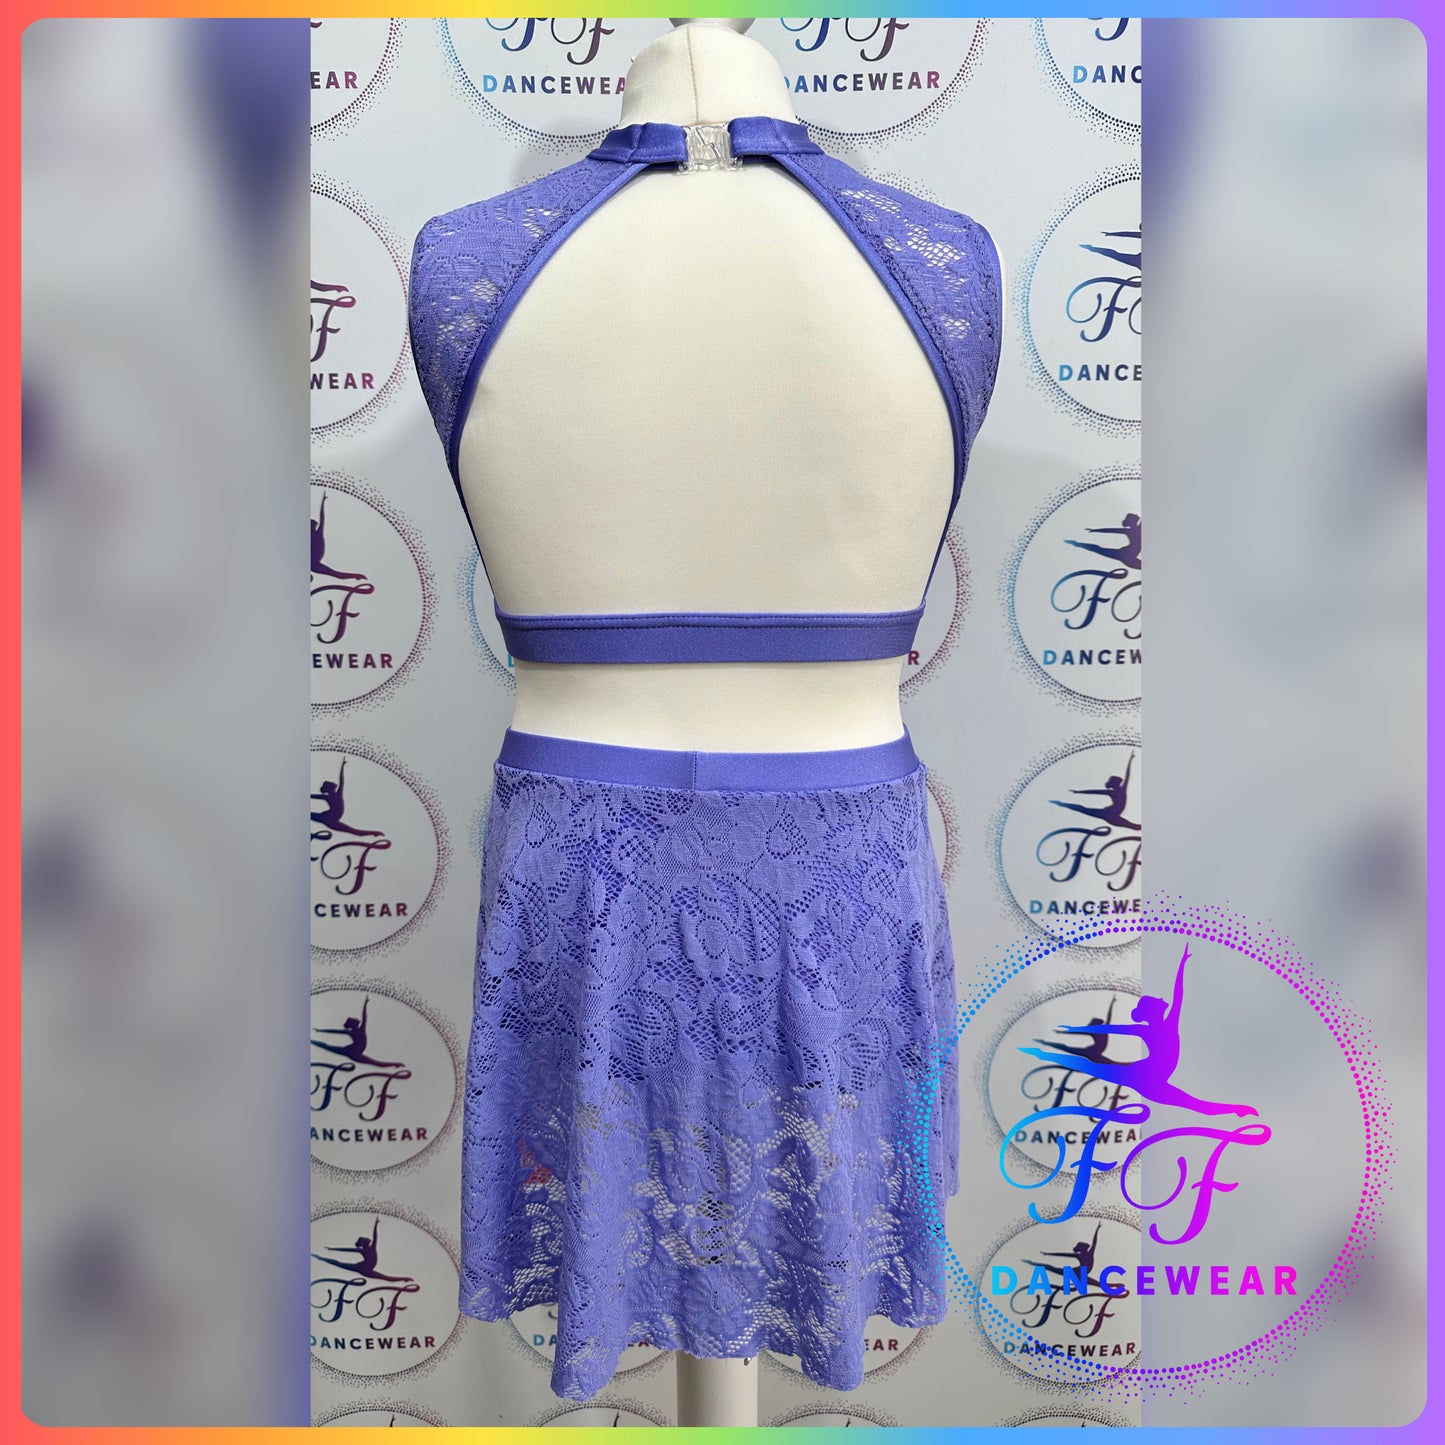 BESPOKE Lilac Lace Lyrical / Contemporary Dance Costume (Size 3a - 11/12 yrs)